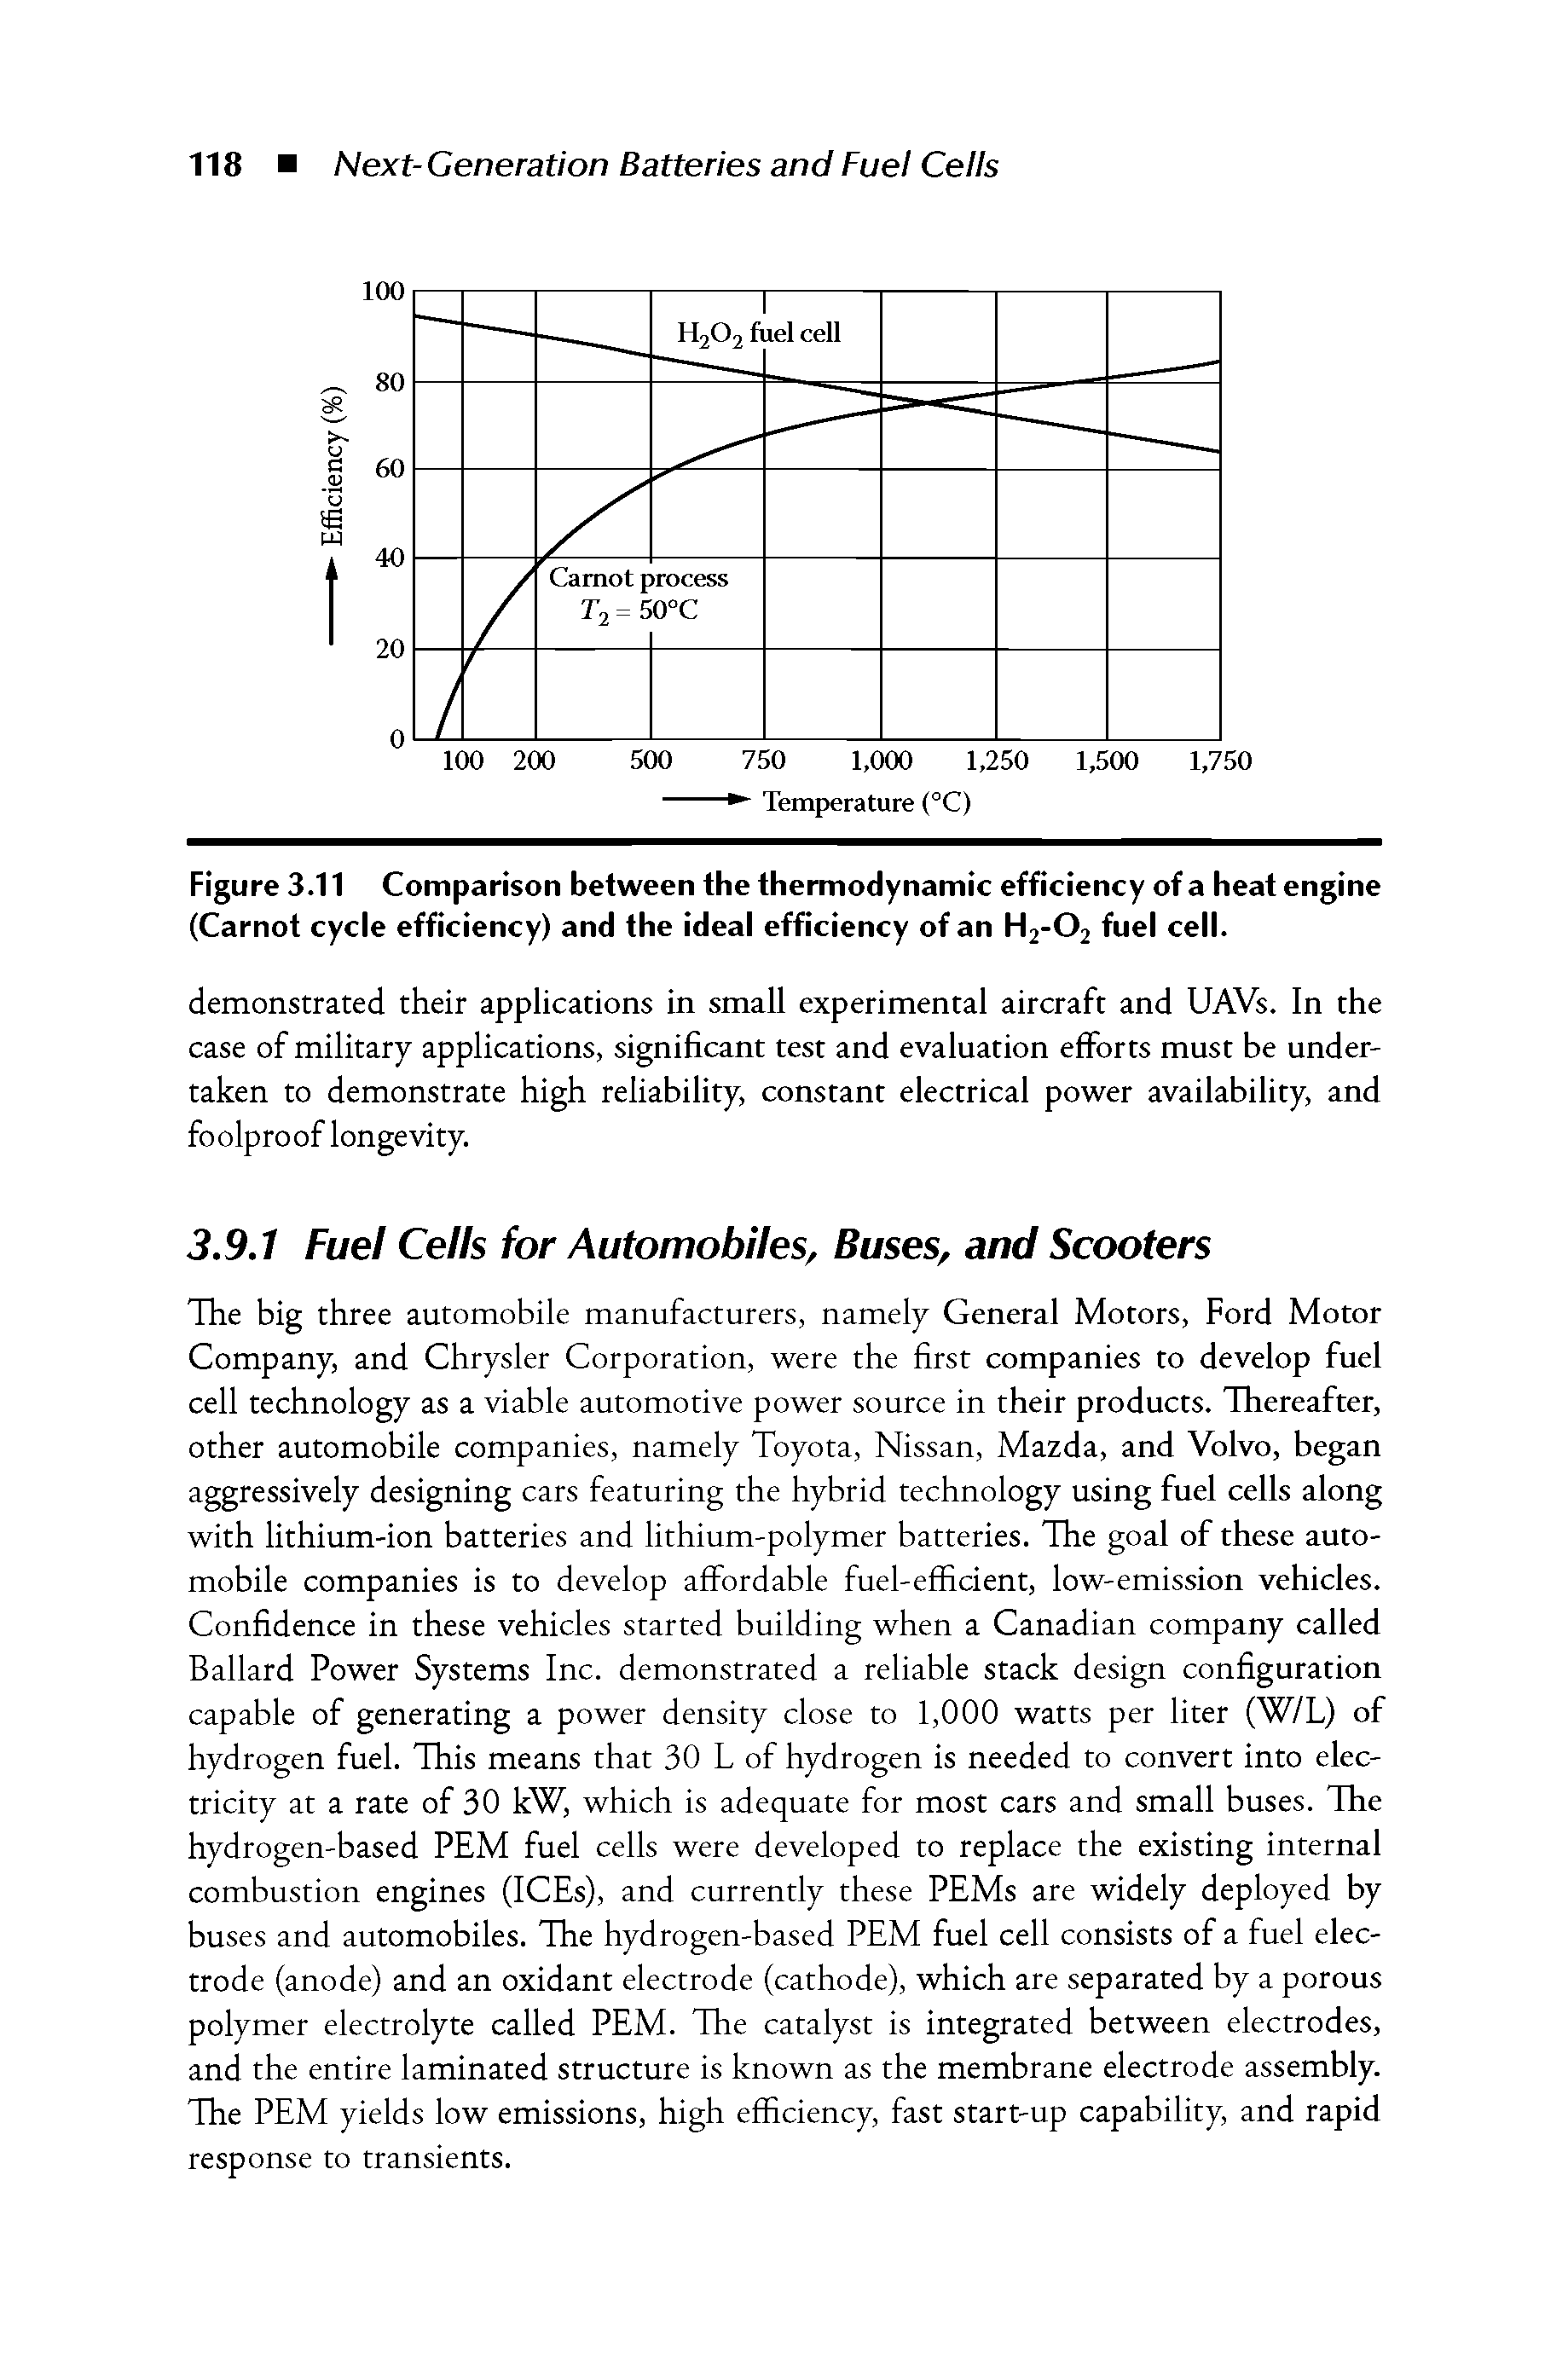 Figure 3.11 Comparison between the thermodynamic efficiency of a heat engine (Carnot cycle efficiency) and the ideal efficiency of an H2-O2 fuel cell.